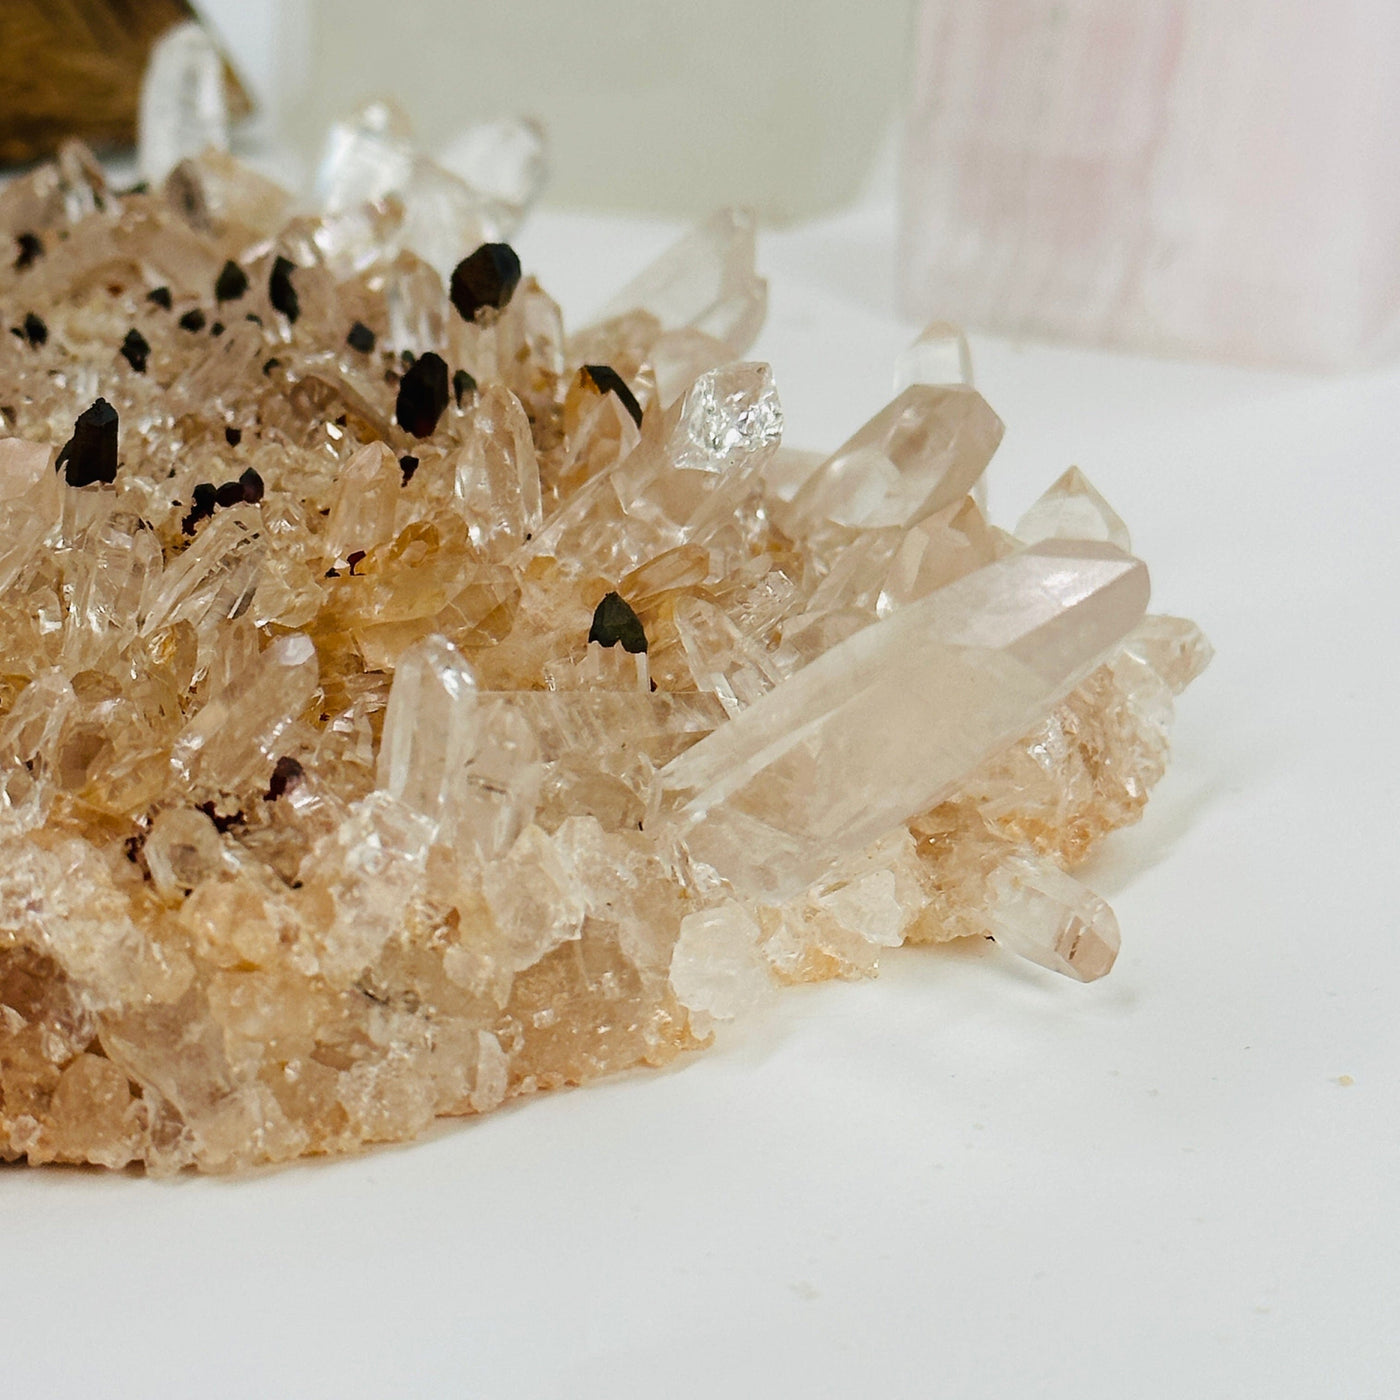 laser quartz cluster with decorations in the background